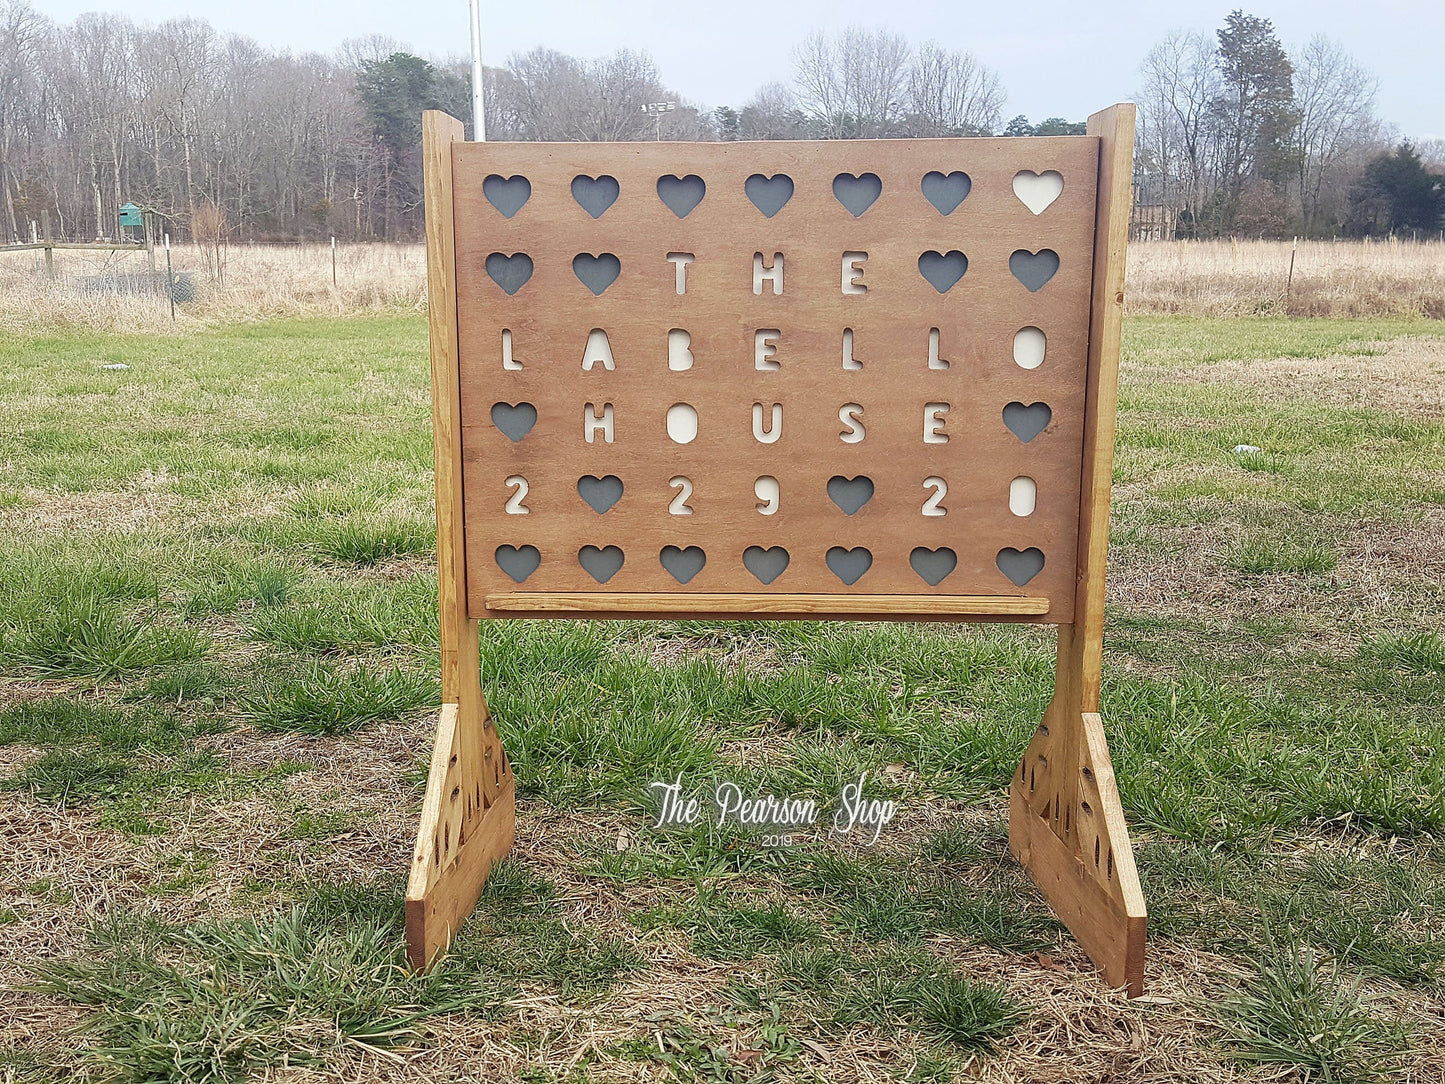 Connect 4 Giant or JR Personalized Hearts Game